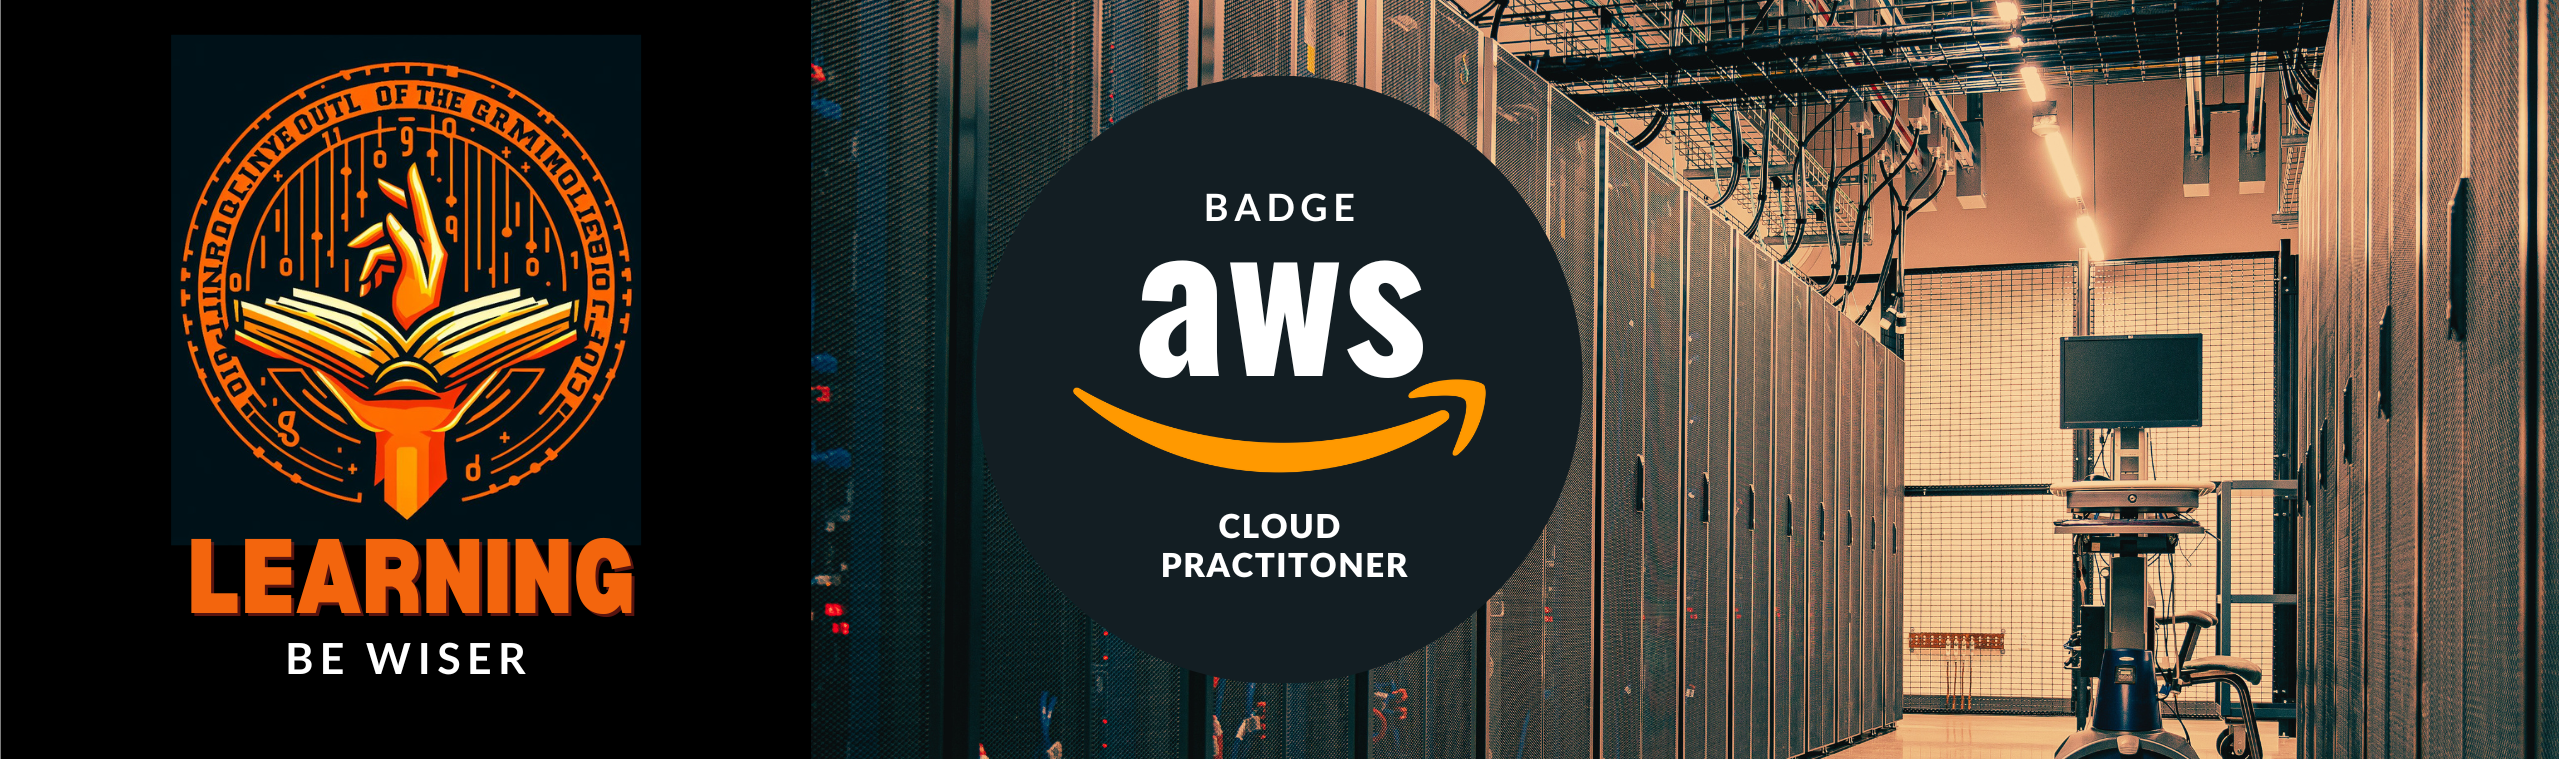 /img/img-posts/aws-cloud-practitioner-knowledge-badge/AWS%20cloud%20practitioner%20badge.png